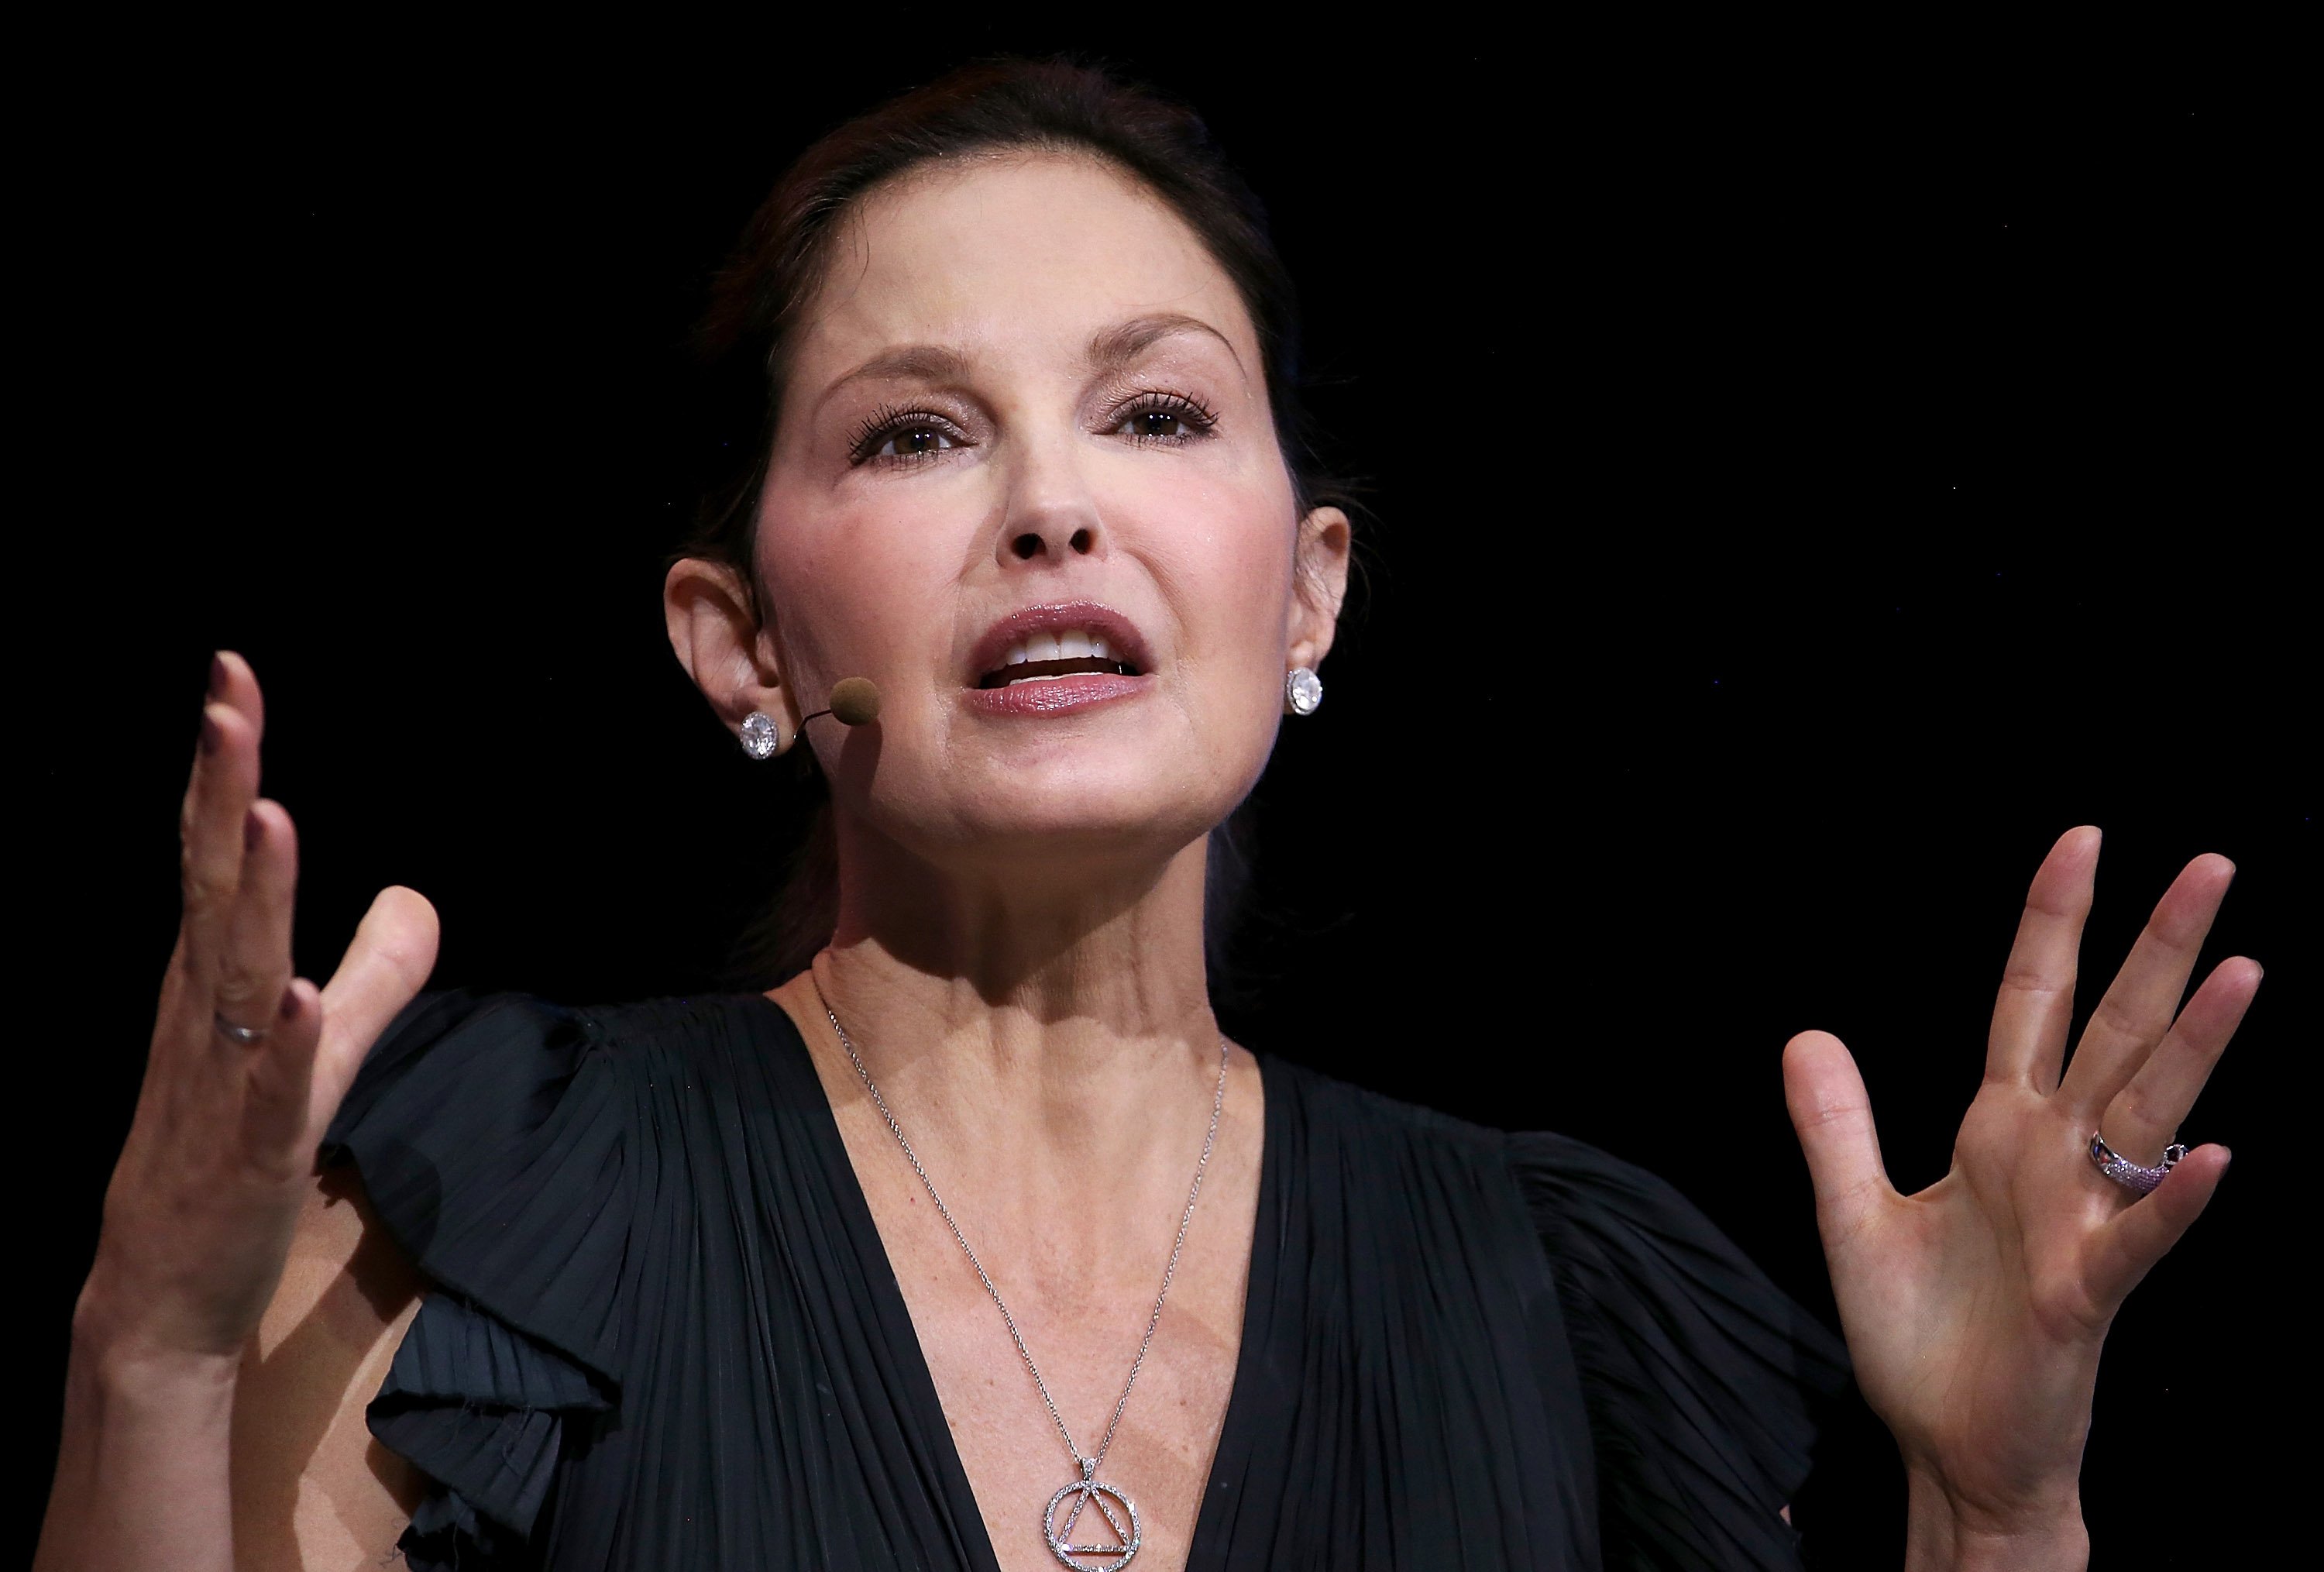 Actress Ashley Judd on April 24 2018 in San Francisco California | Source: Getty Images